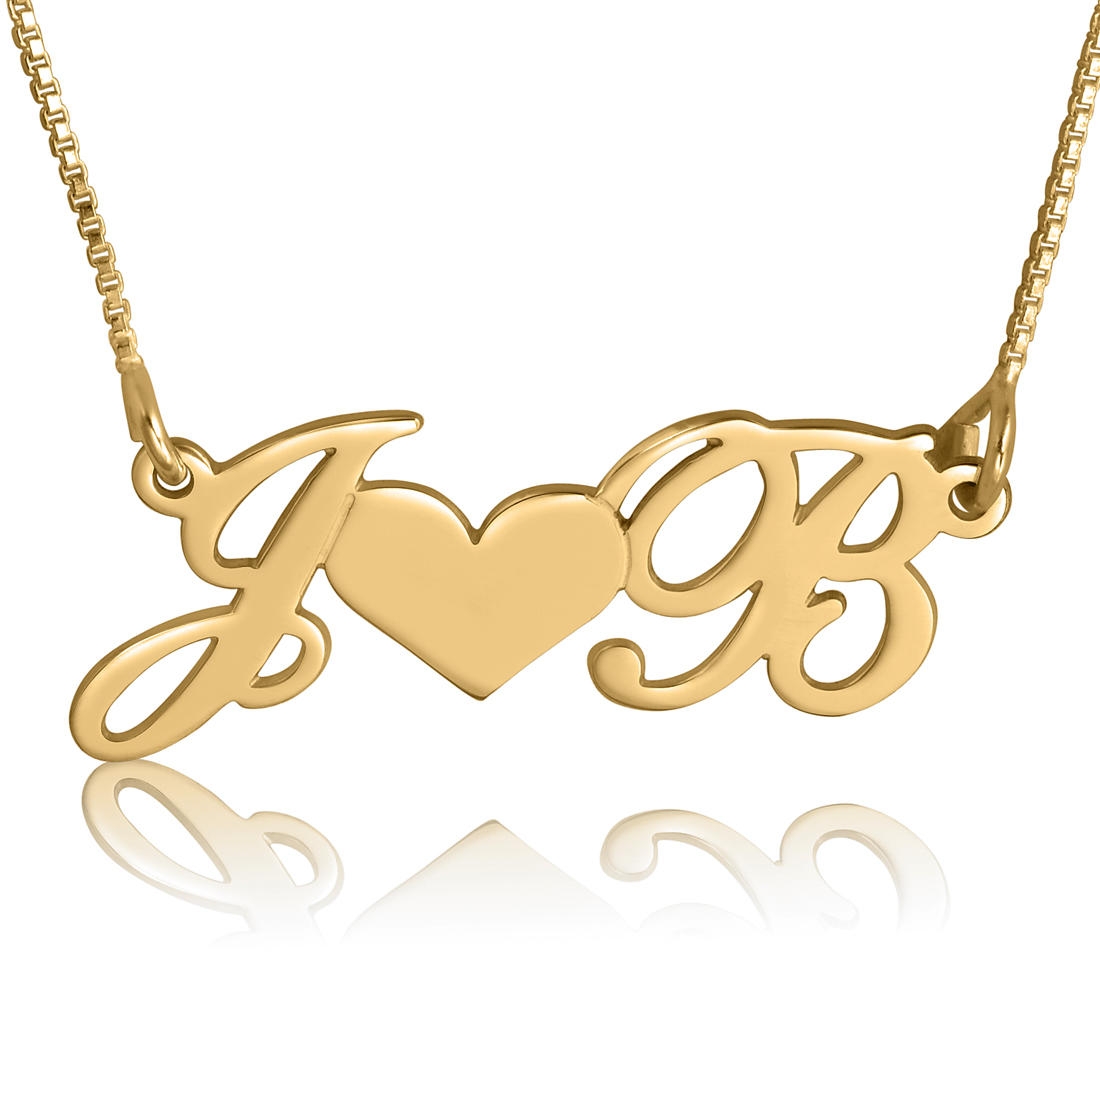 Buy Gold Heart Initial Letter Pendant Necklace Online in India - Etsy